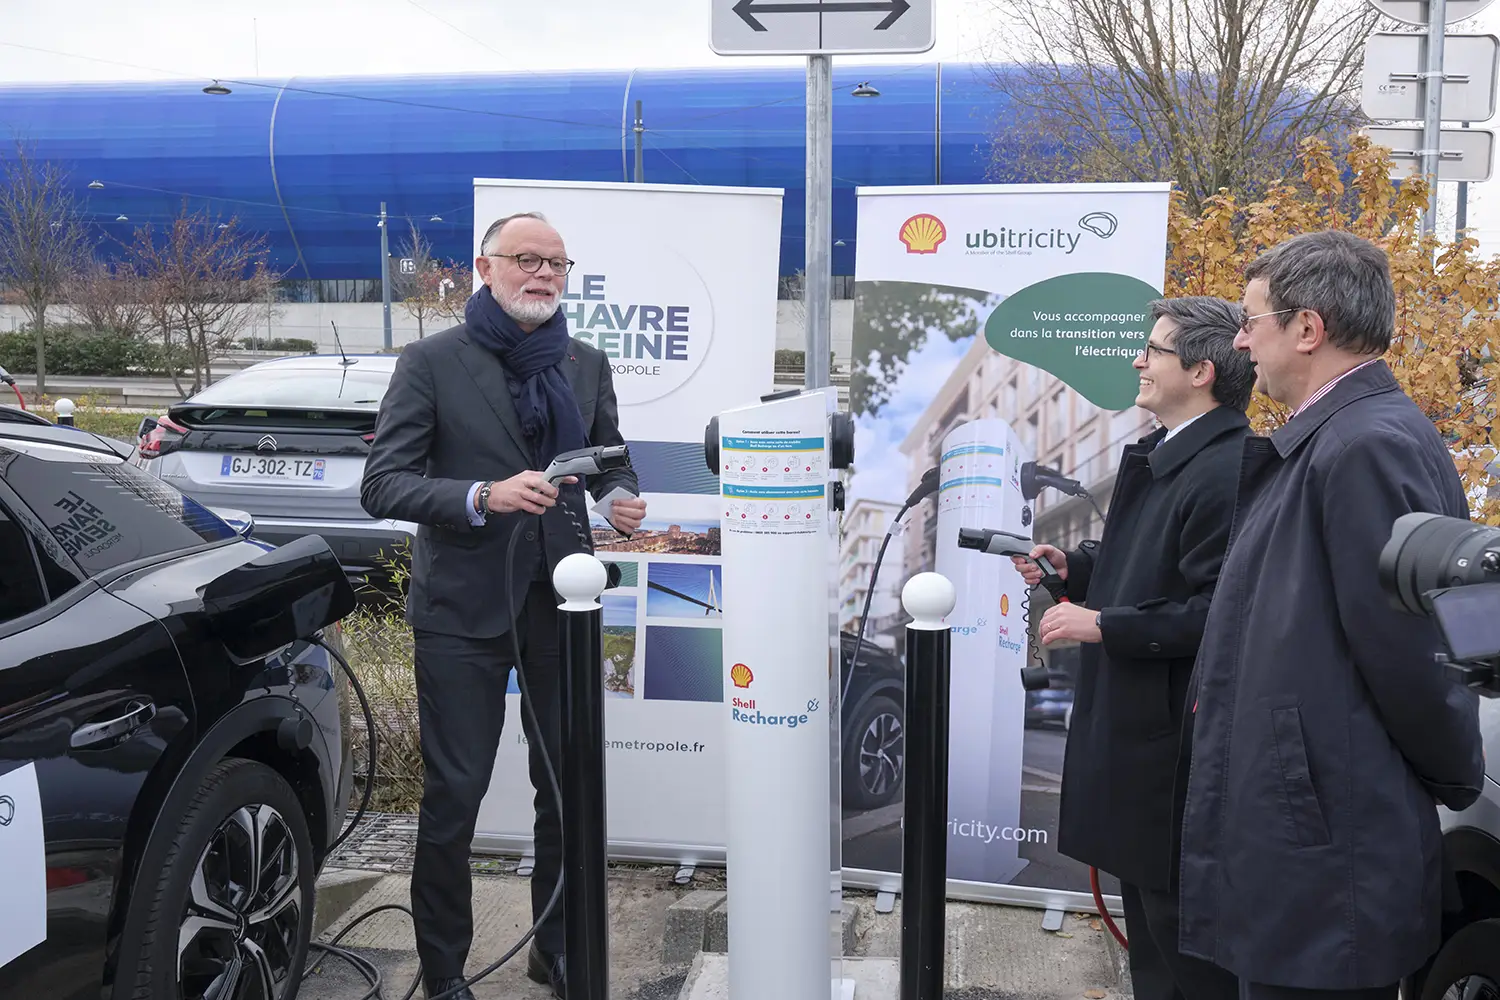 ubitricity celebrates the inauguration of Le Havre’s first recharging hub